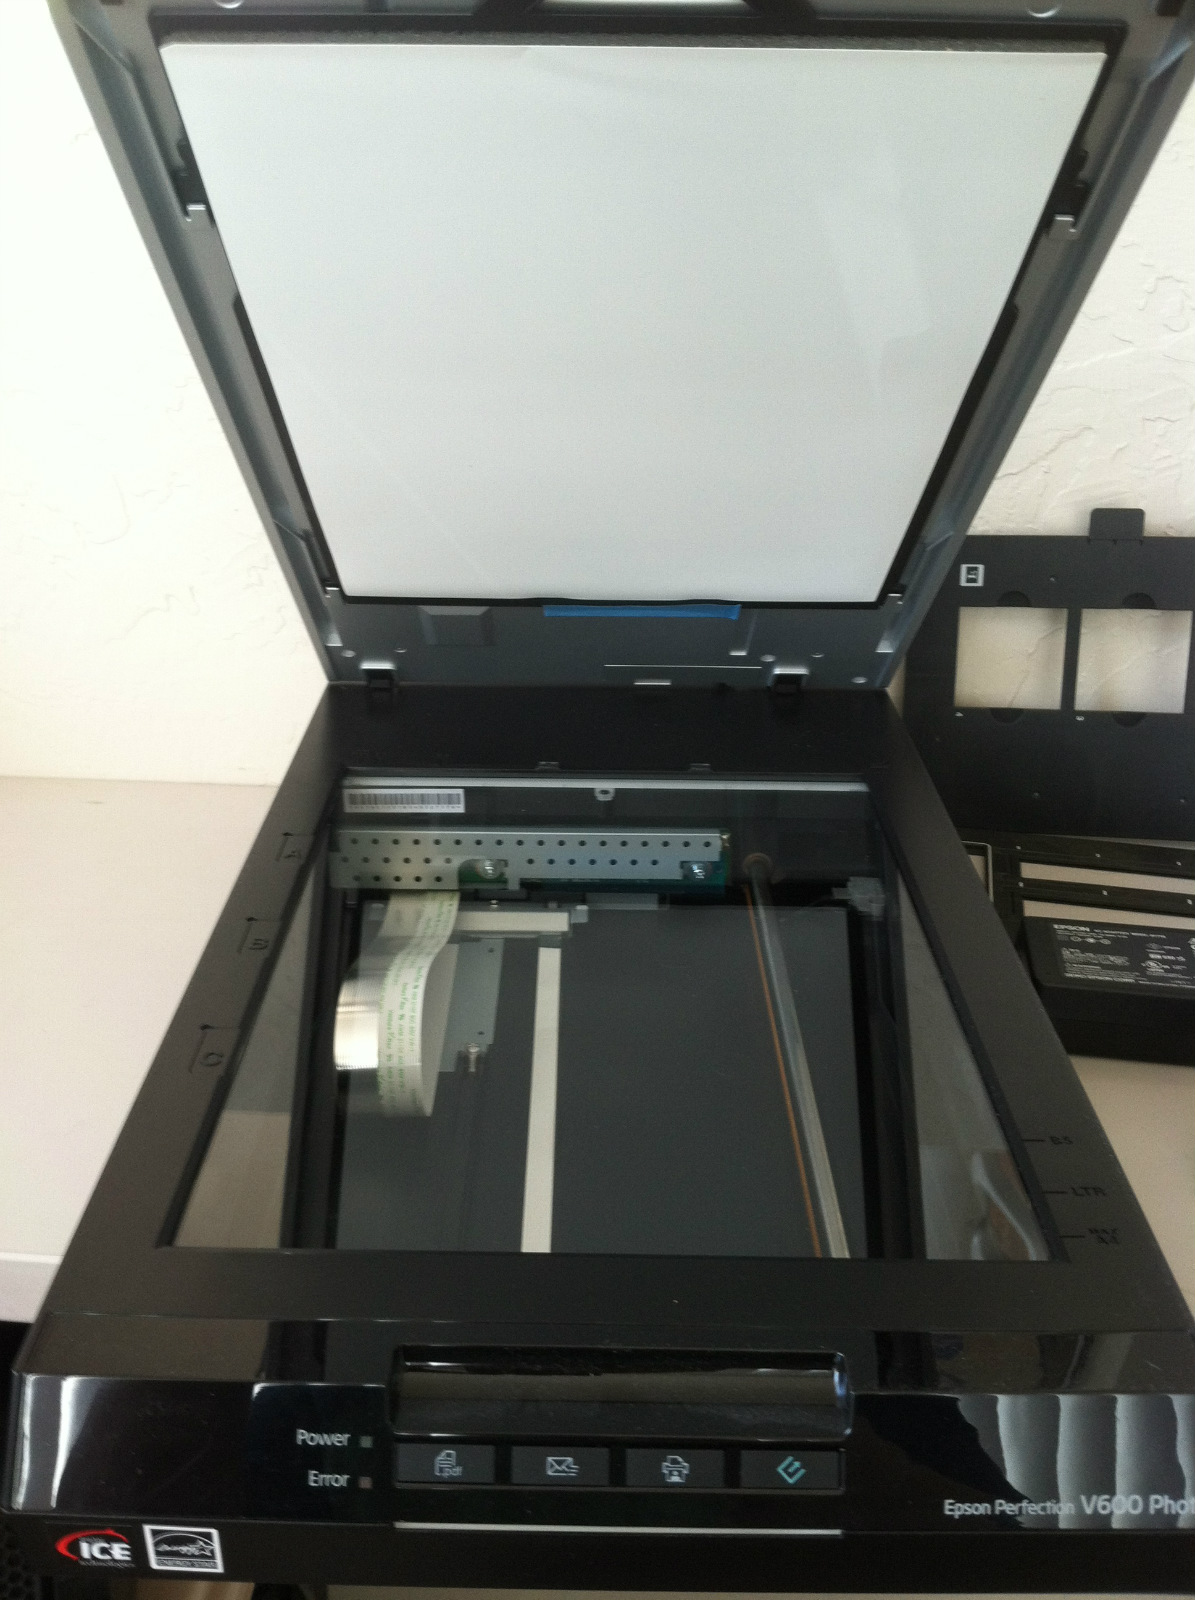 Imaging Surplus Epson Perfection V600 Photo Flatbed Scanner J252a Complete 0743